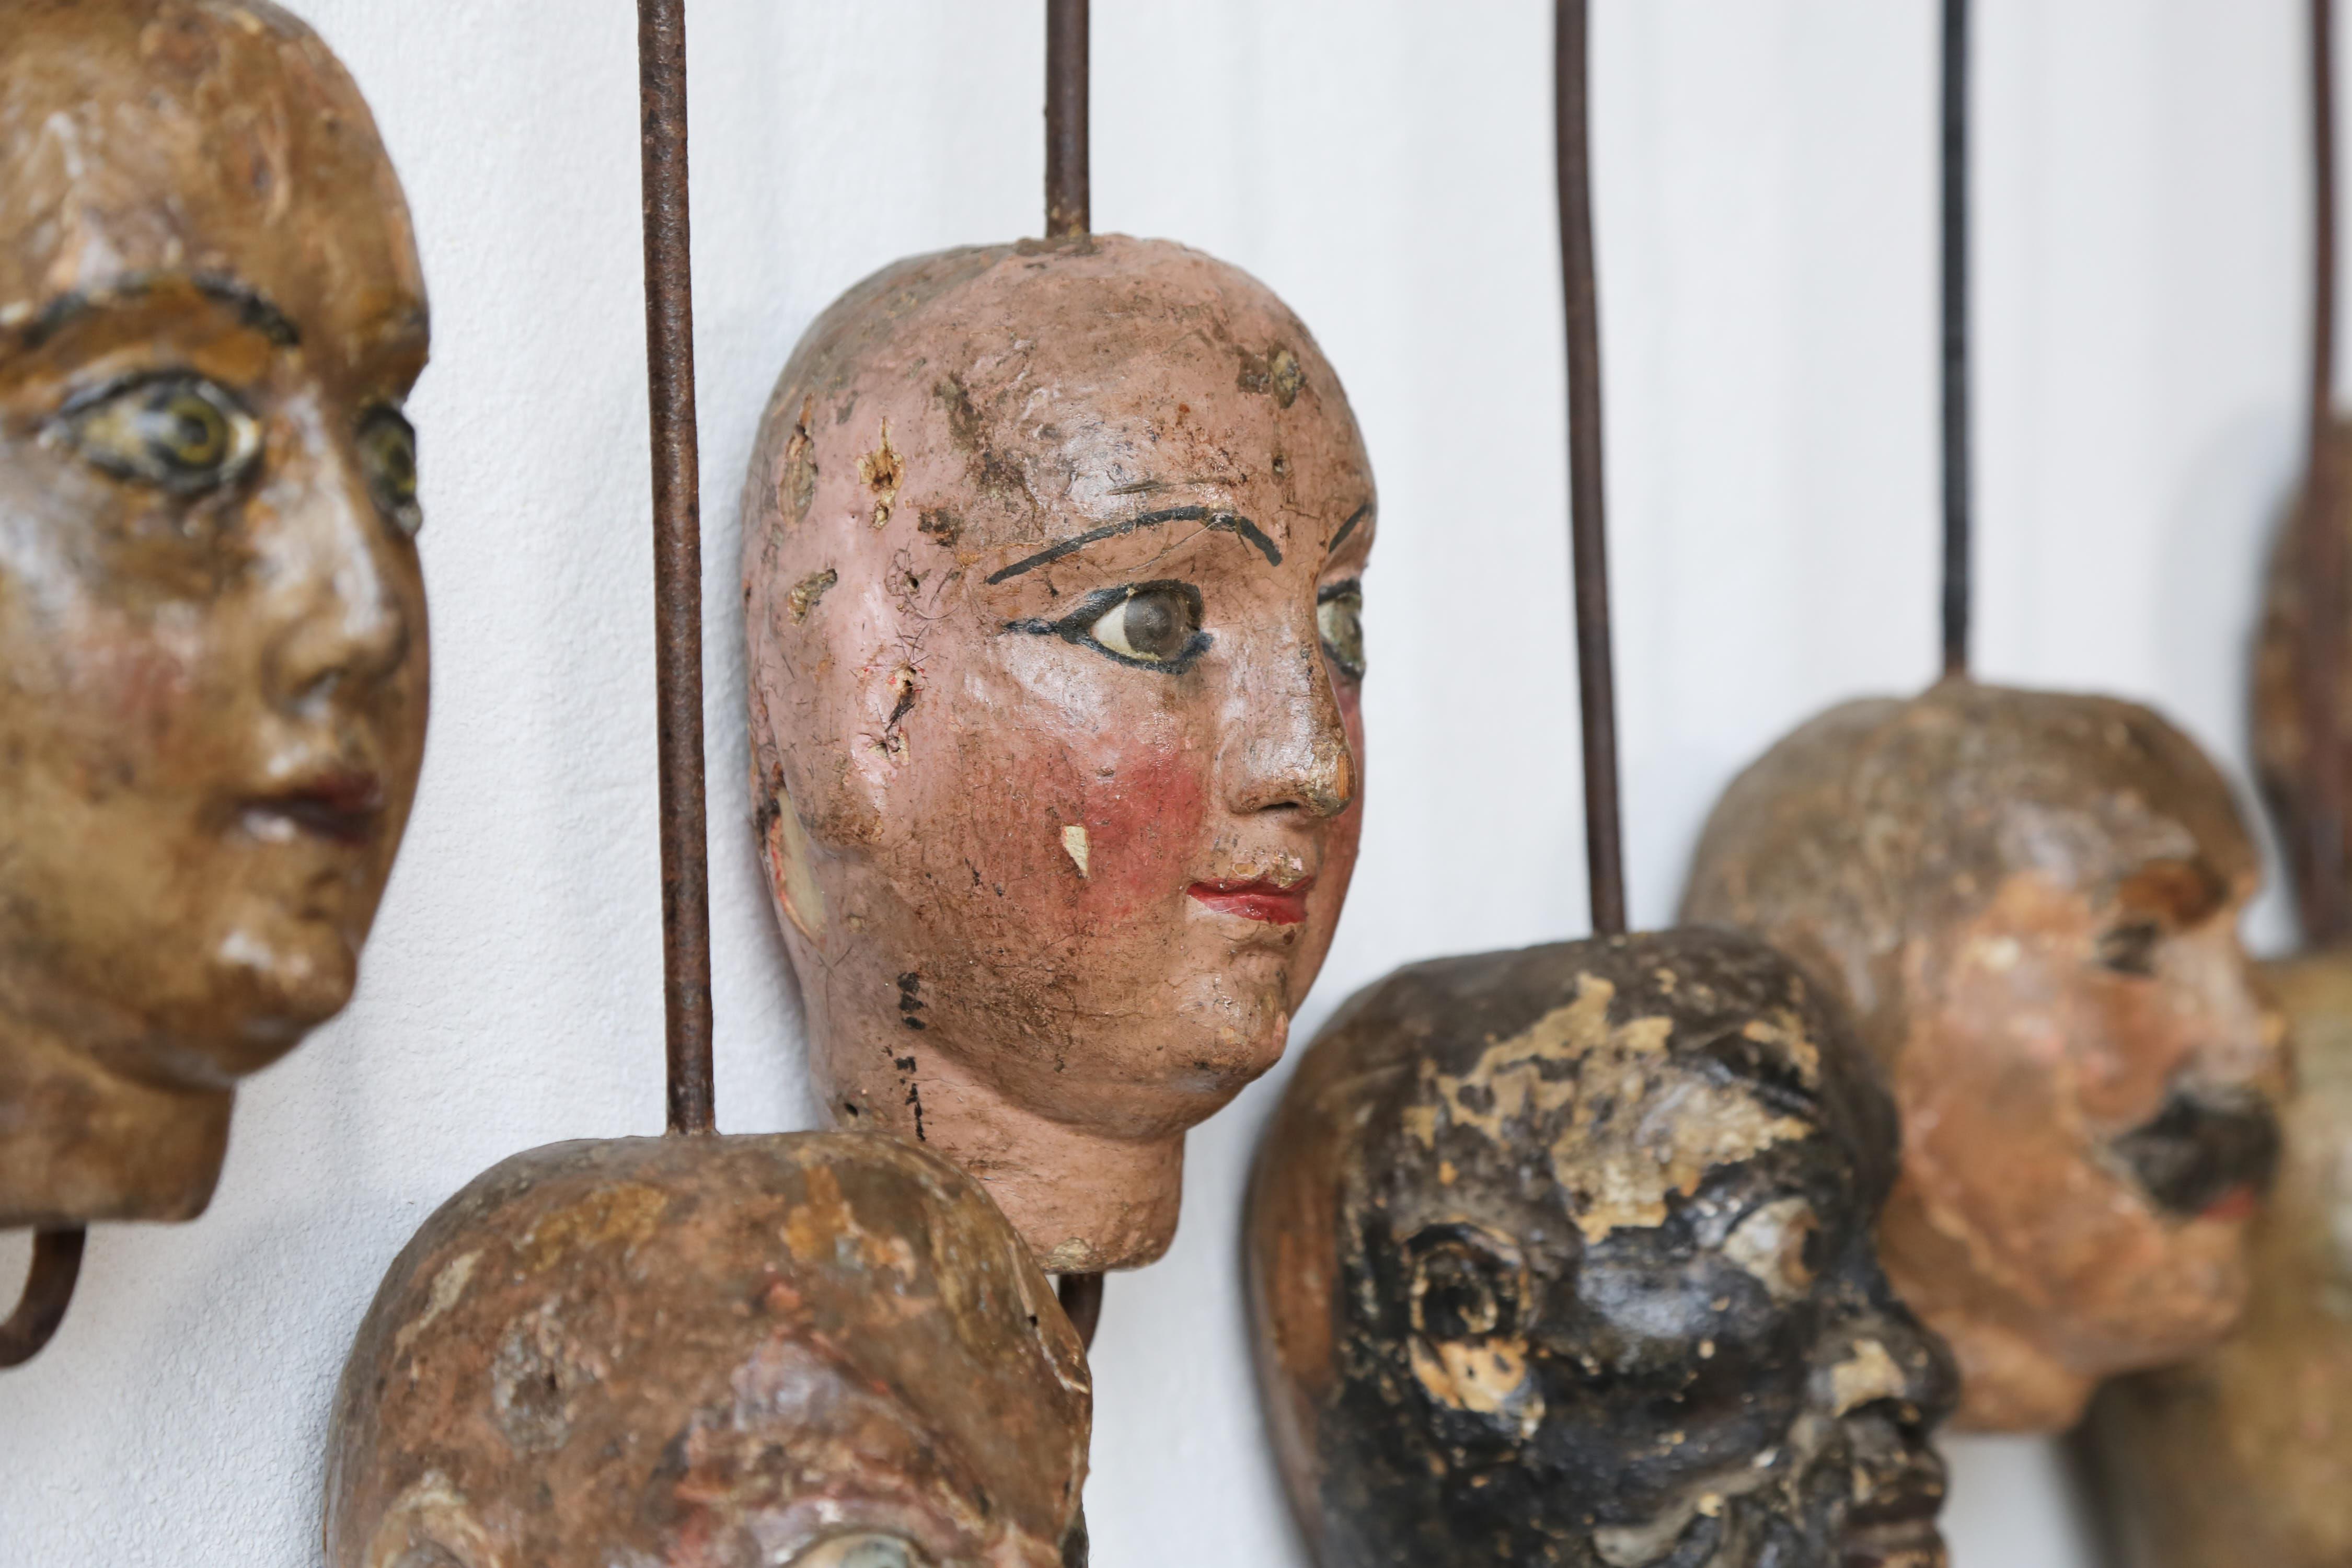 Exceptional Set of 24 Unique Hand-crafted Marionette Heads, Italy, 19th Century For Sale 9